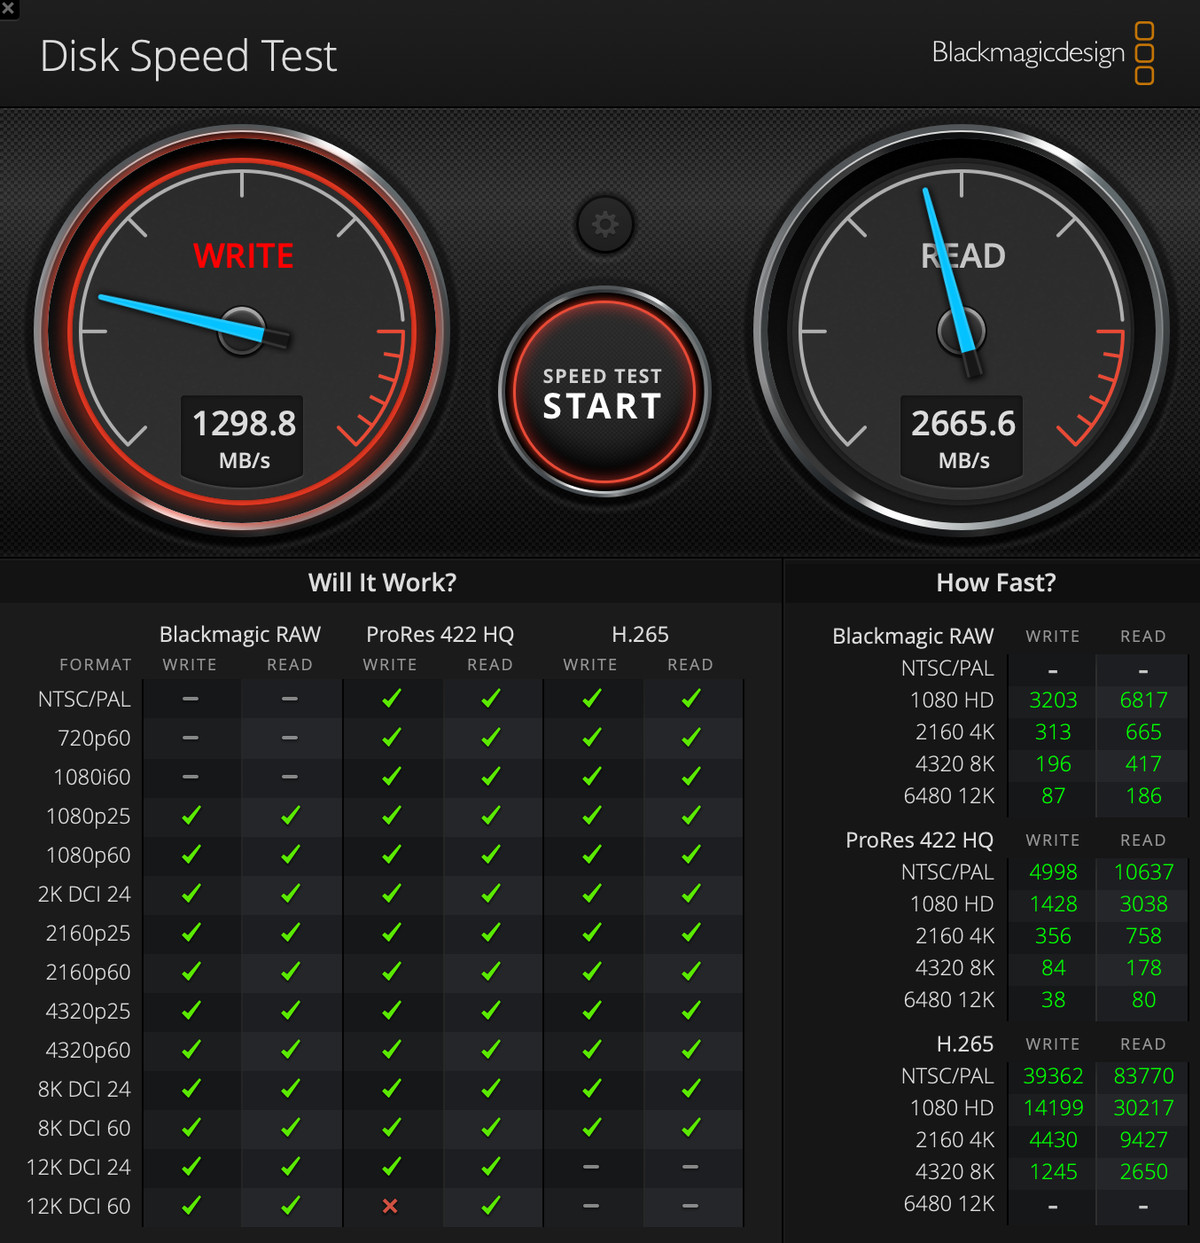 A screenshot of Blackmagic Disk Speed ​​Test with scores of 1298.8 for writing and 2665.6 for reading.